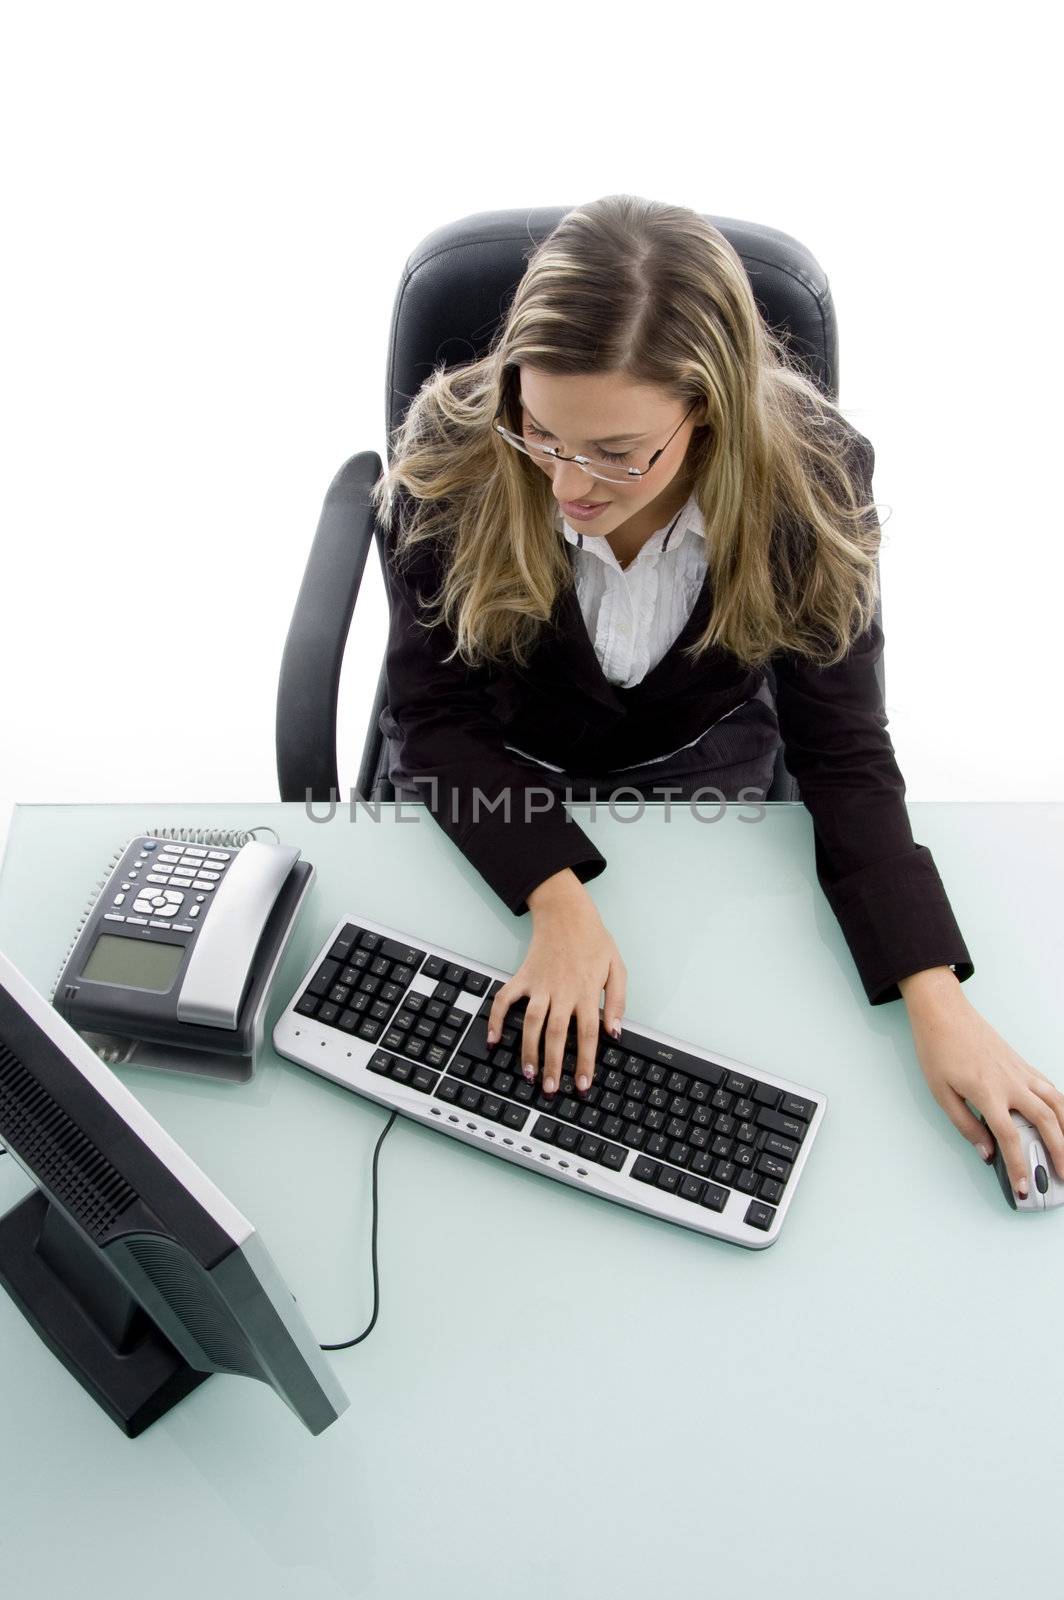 high angle view of woman working on computer by imagerymajestic